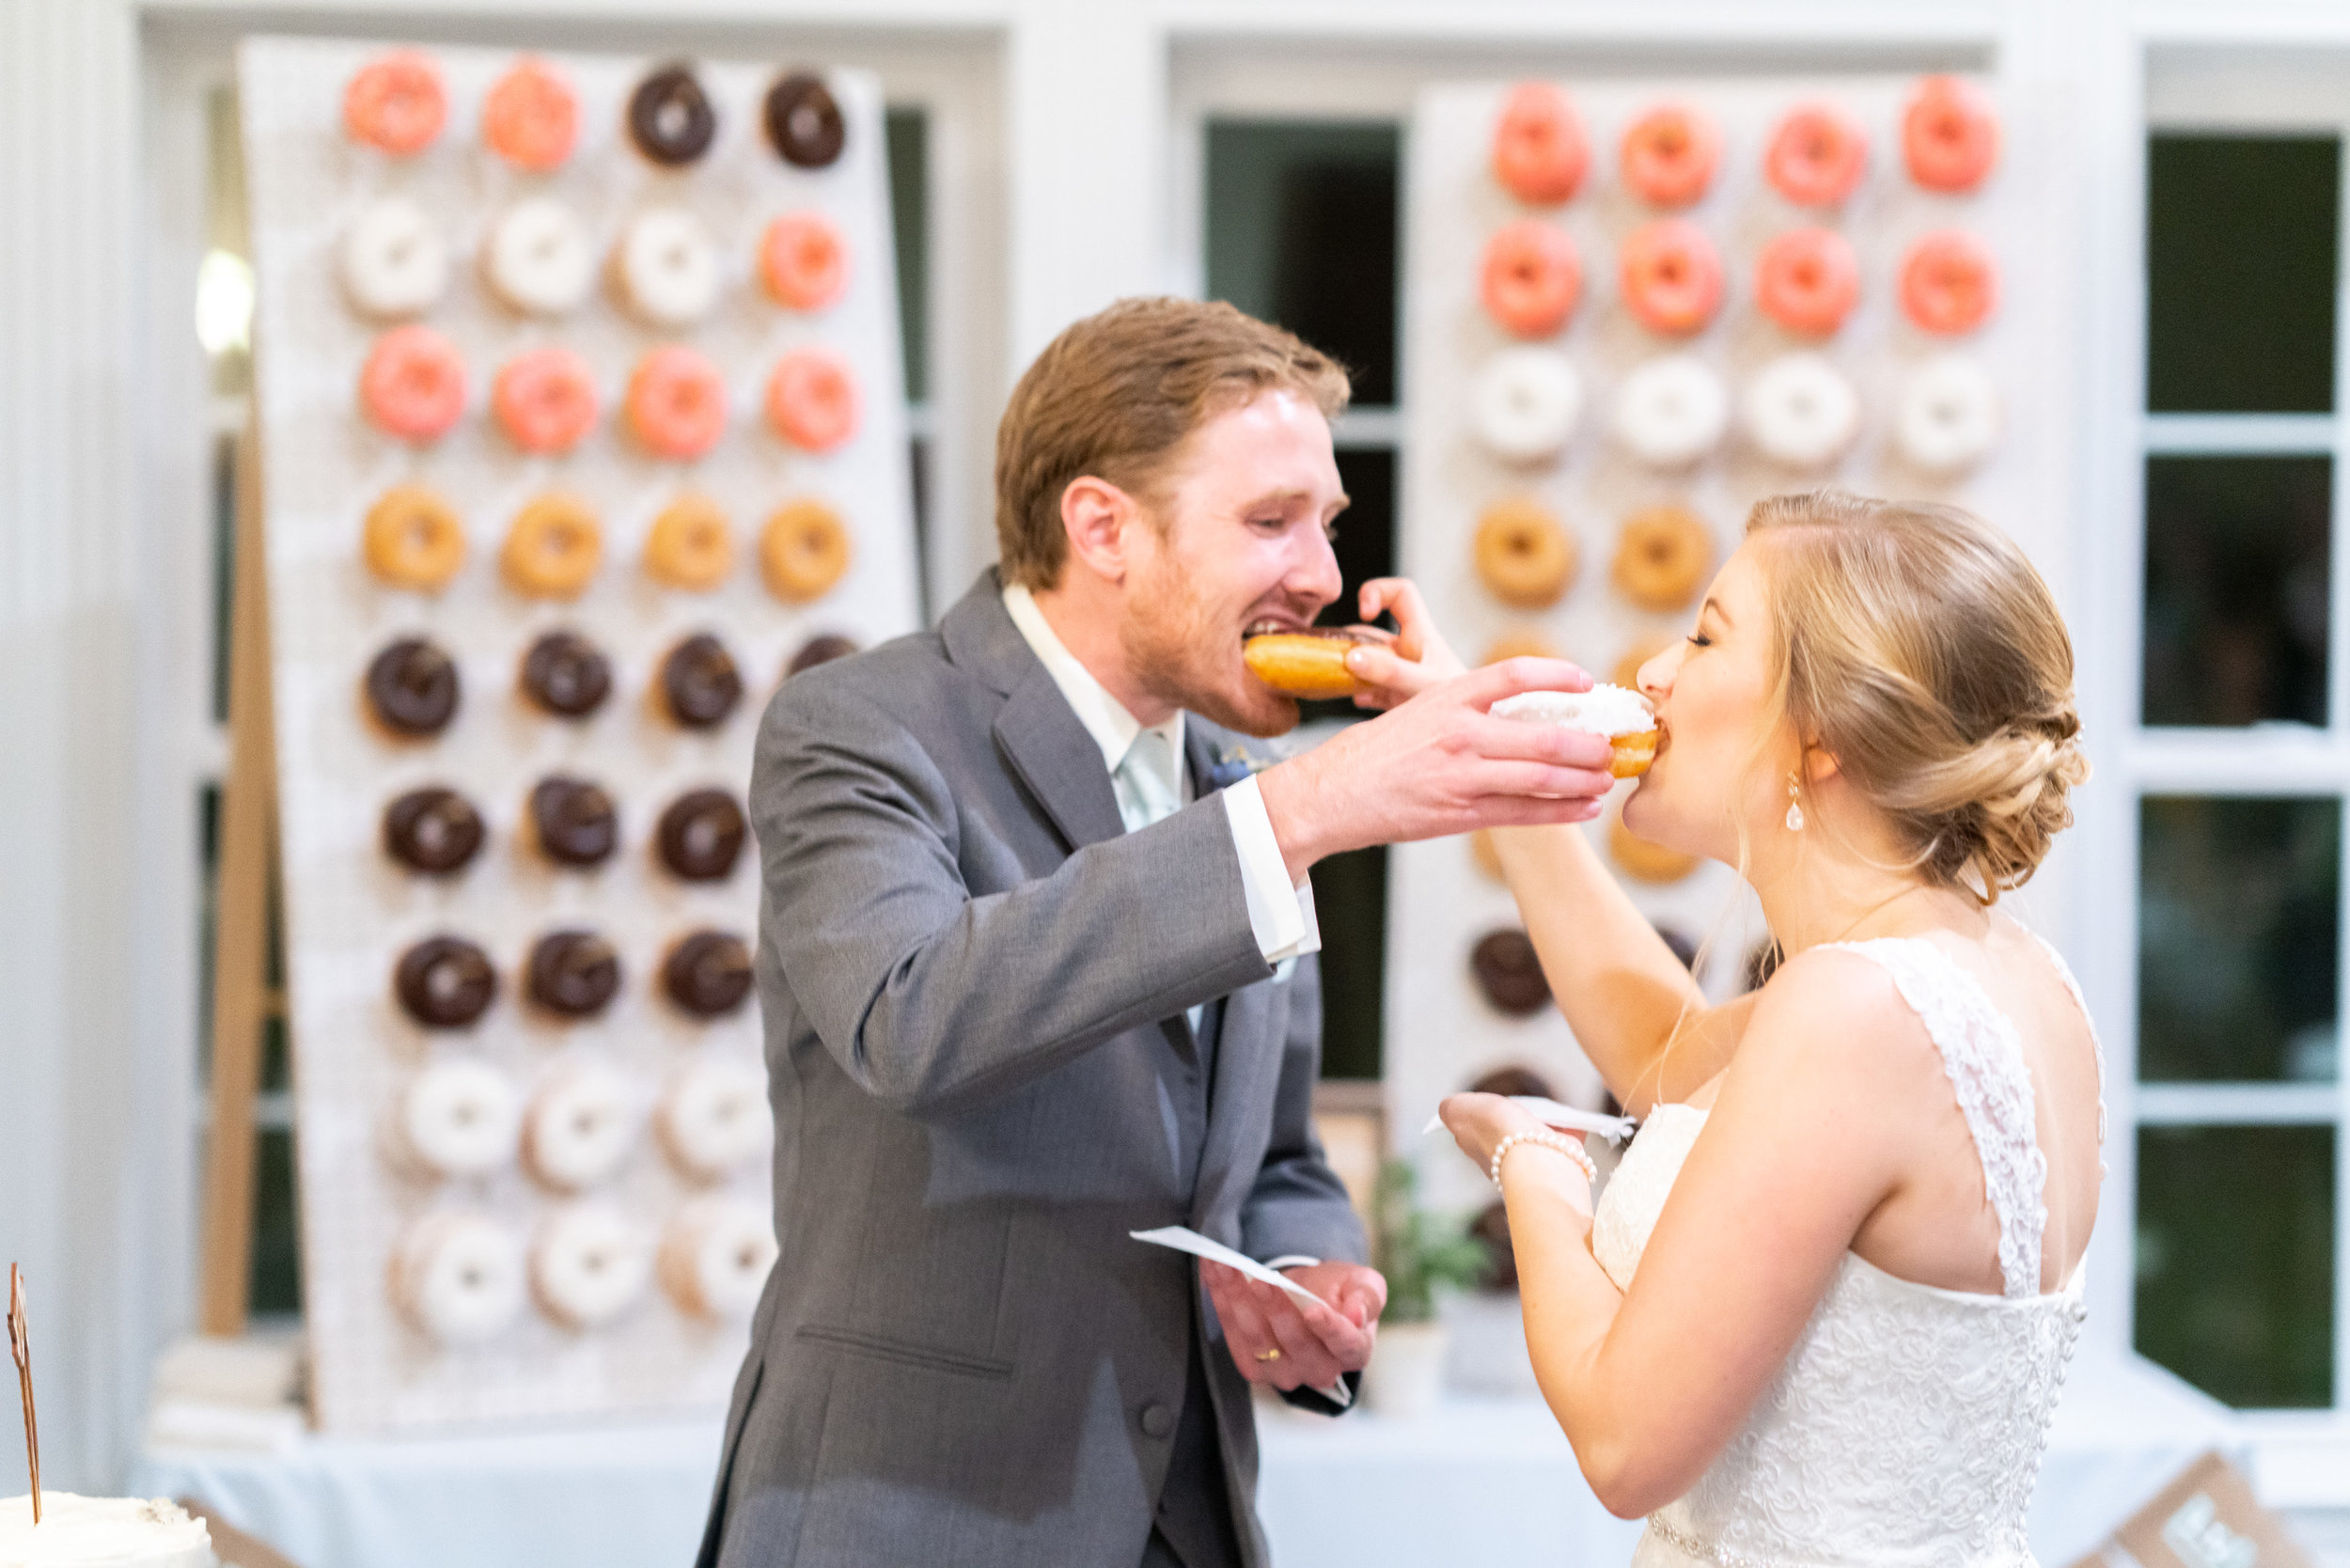 Bride and groom sharing donuts during cake cutting at stone manor country club